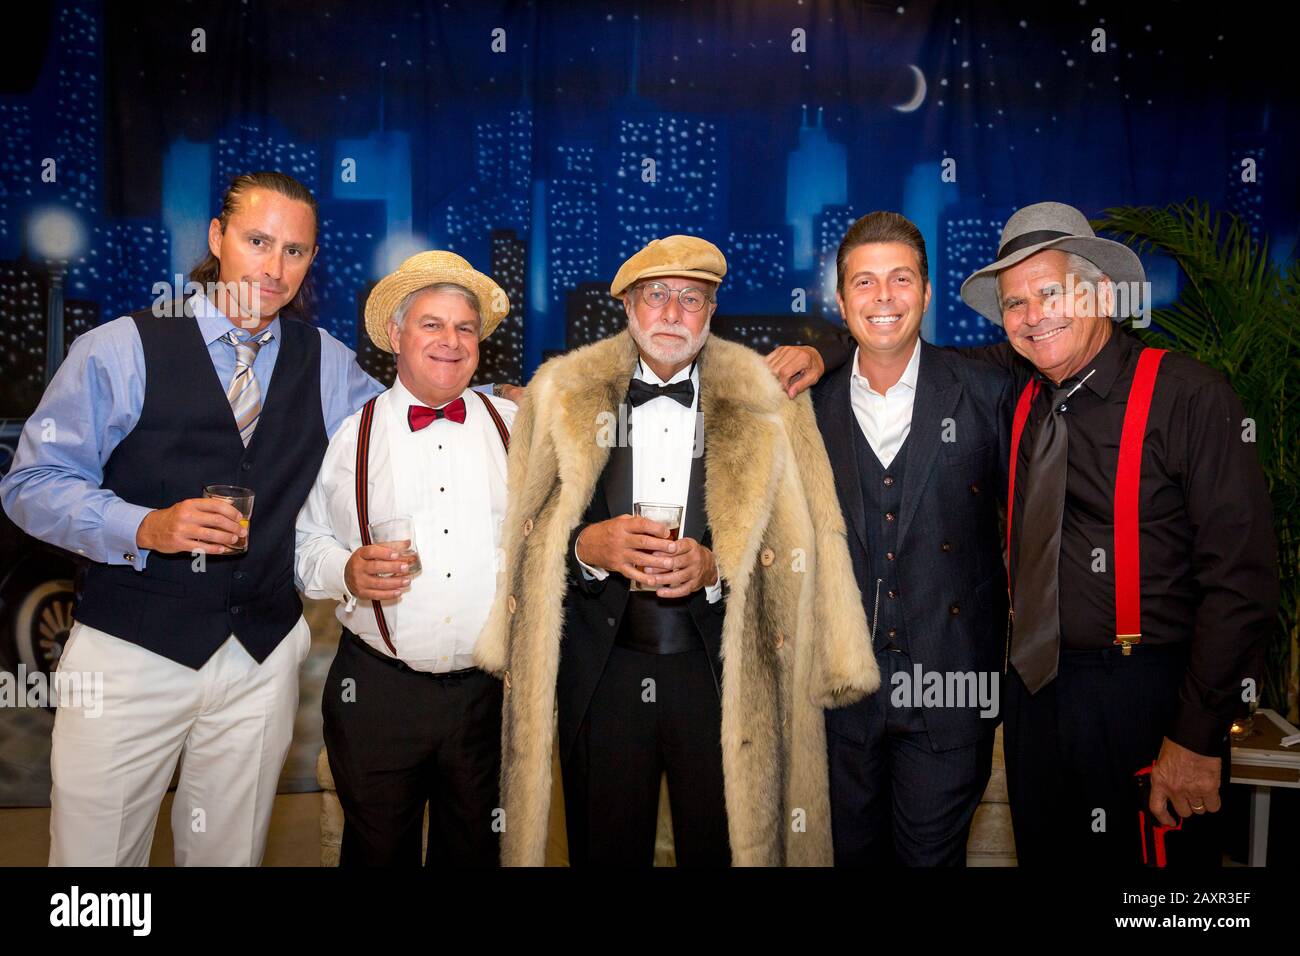 Tough guys pose at a 'Great Gatsby' themed party in Naples, Florida, USA Stock Photo